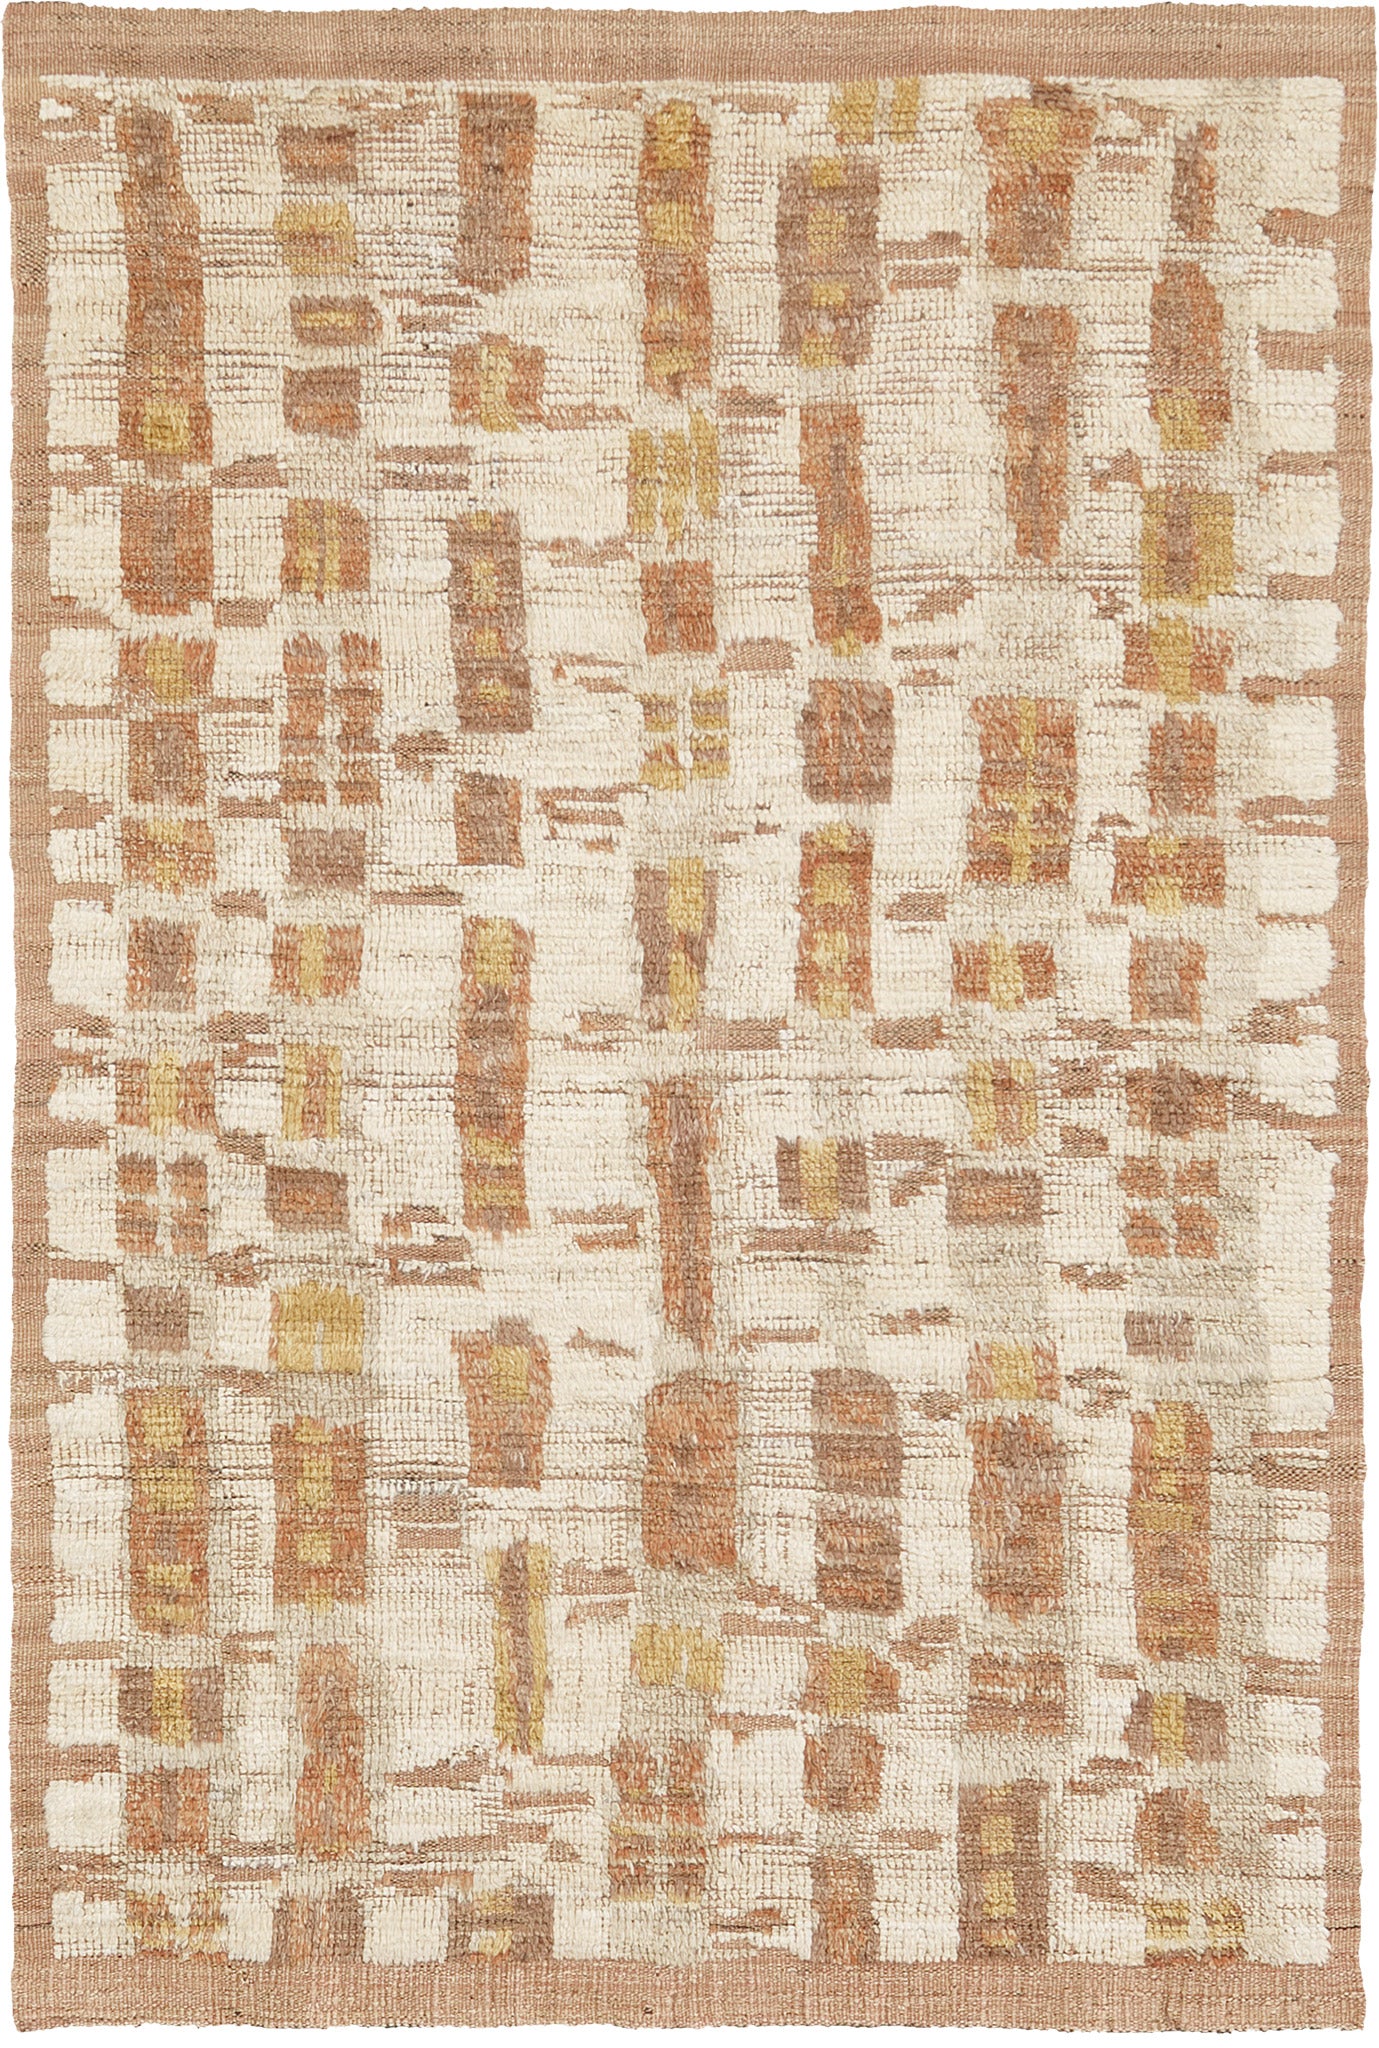 Modern Rug Image 3561 Ayich, Kust Collection